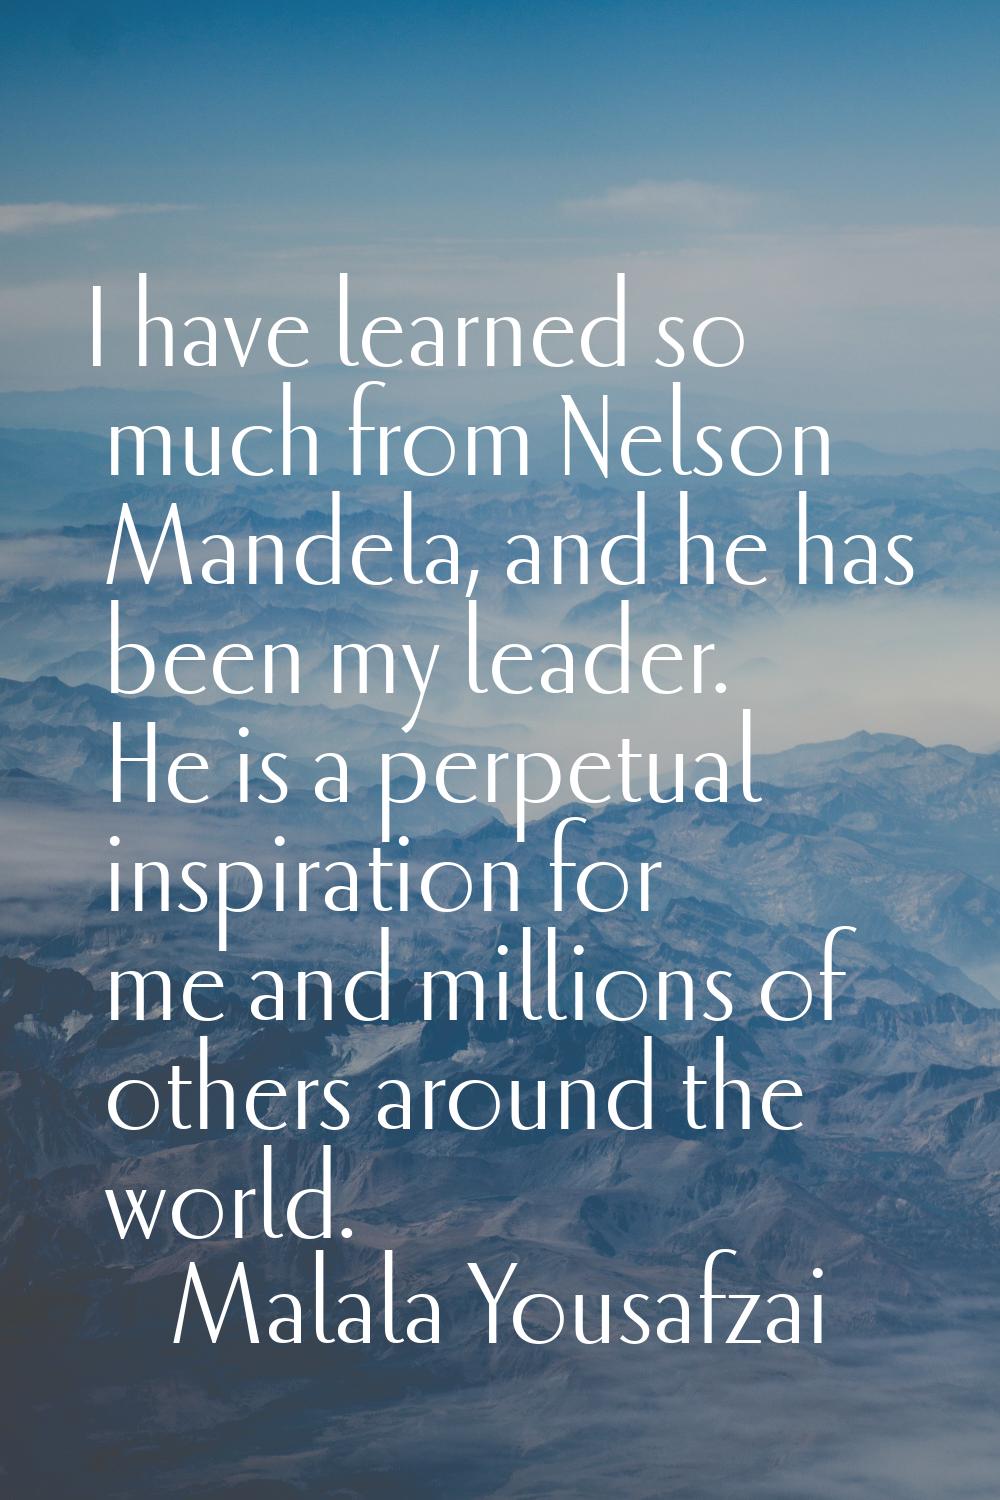 I have learned so much from Nelson Mandela, and he has been my leader. He is a perpetual inspiratio